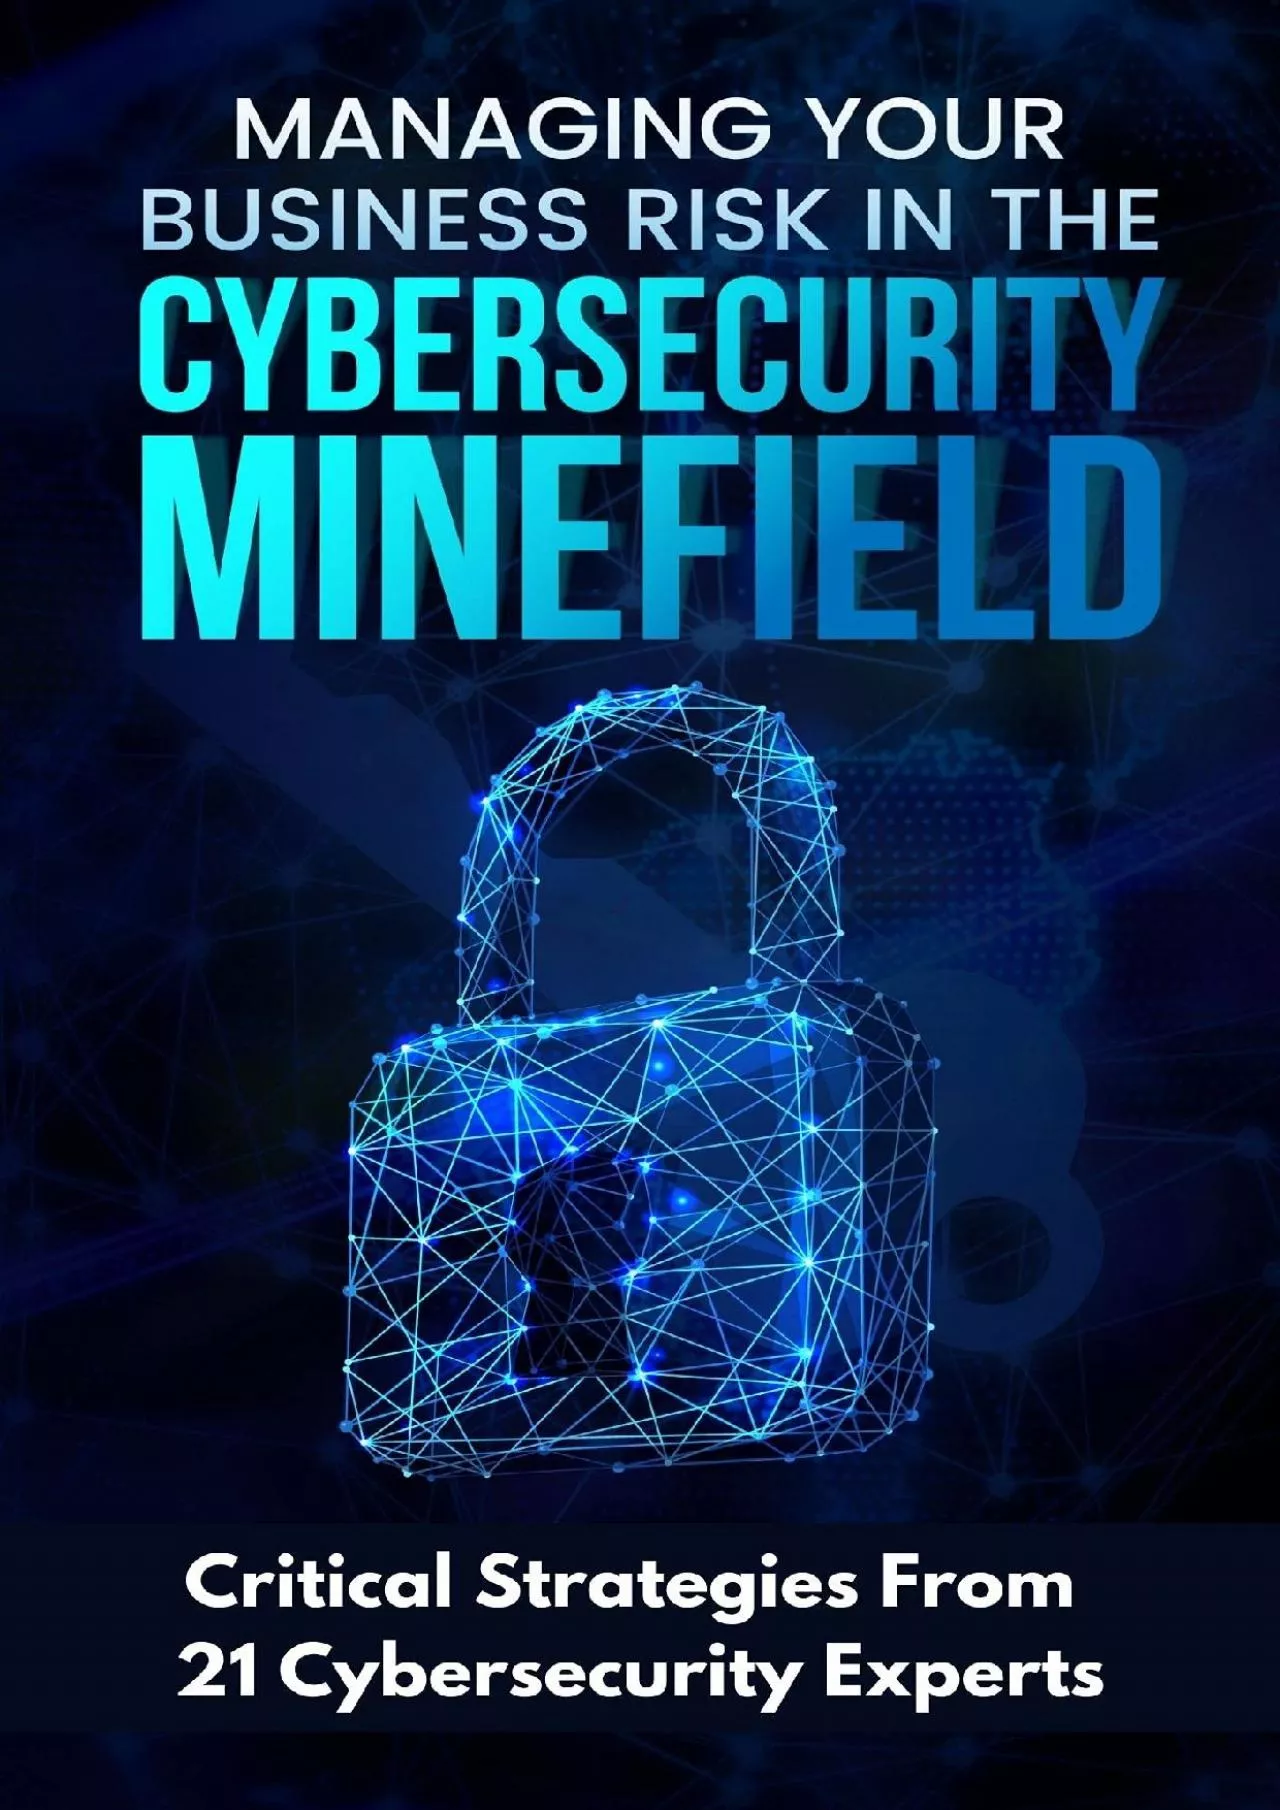 [BEST]-Managing Your Business Risk in the Cybersecurity Minefield: Critical Strategies